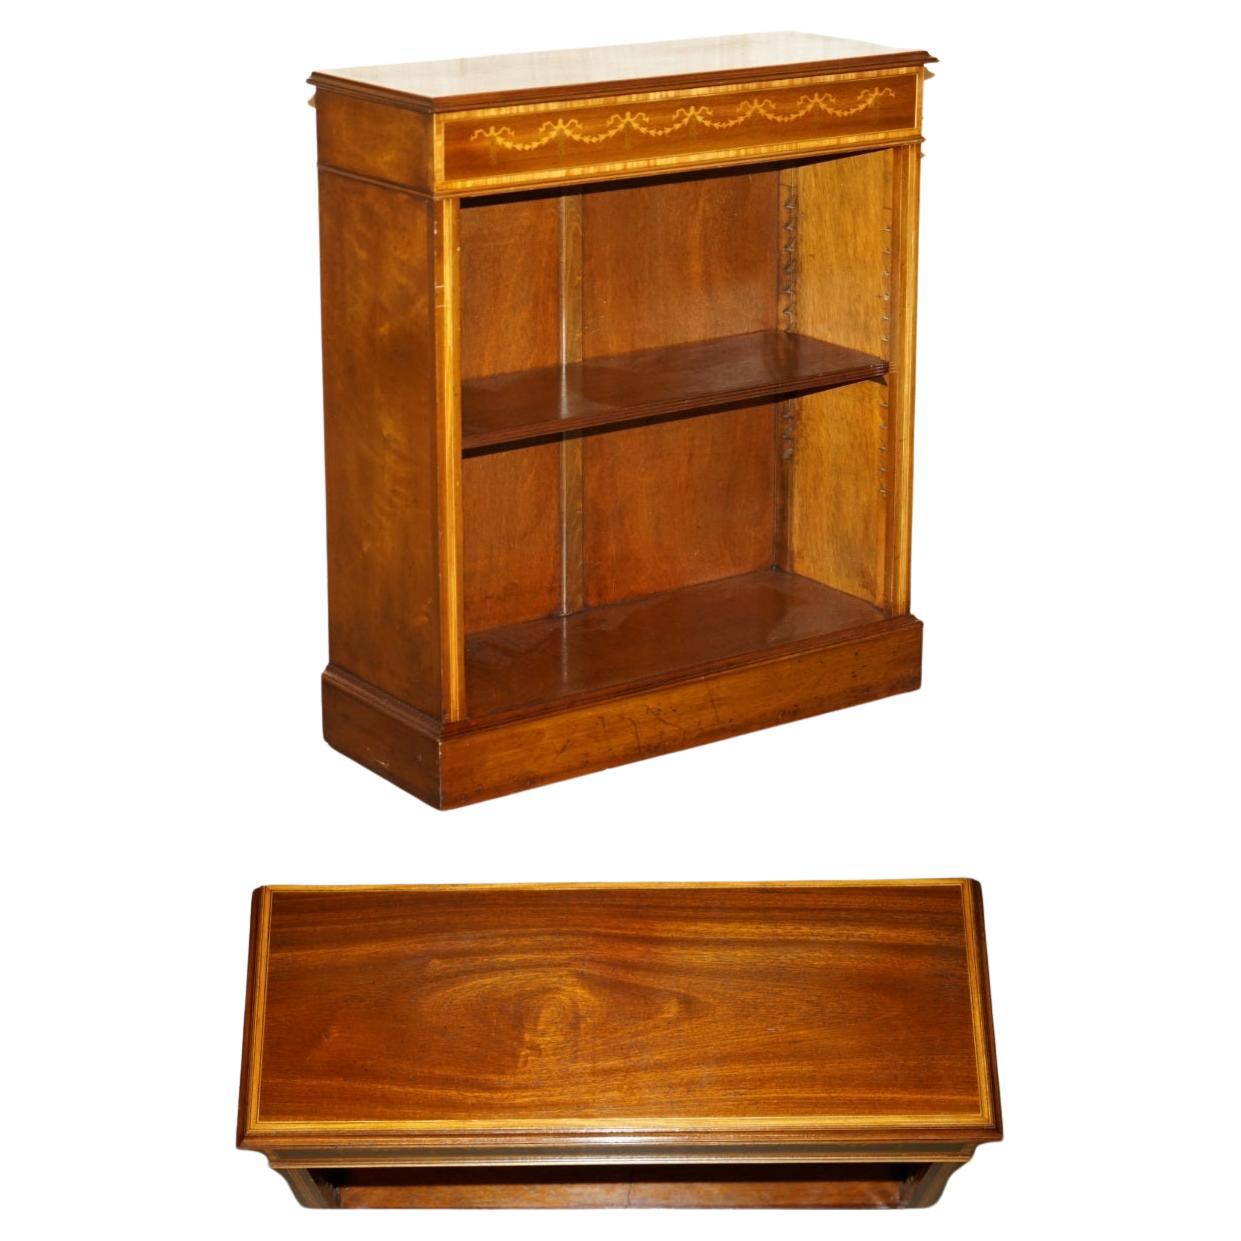 Exquisite BRiGHTS OF NETTLEBED SHERATON REVIVAL DWARF OPEN BOOKCASE im Angebot